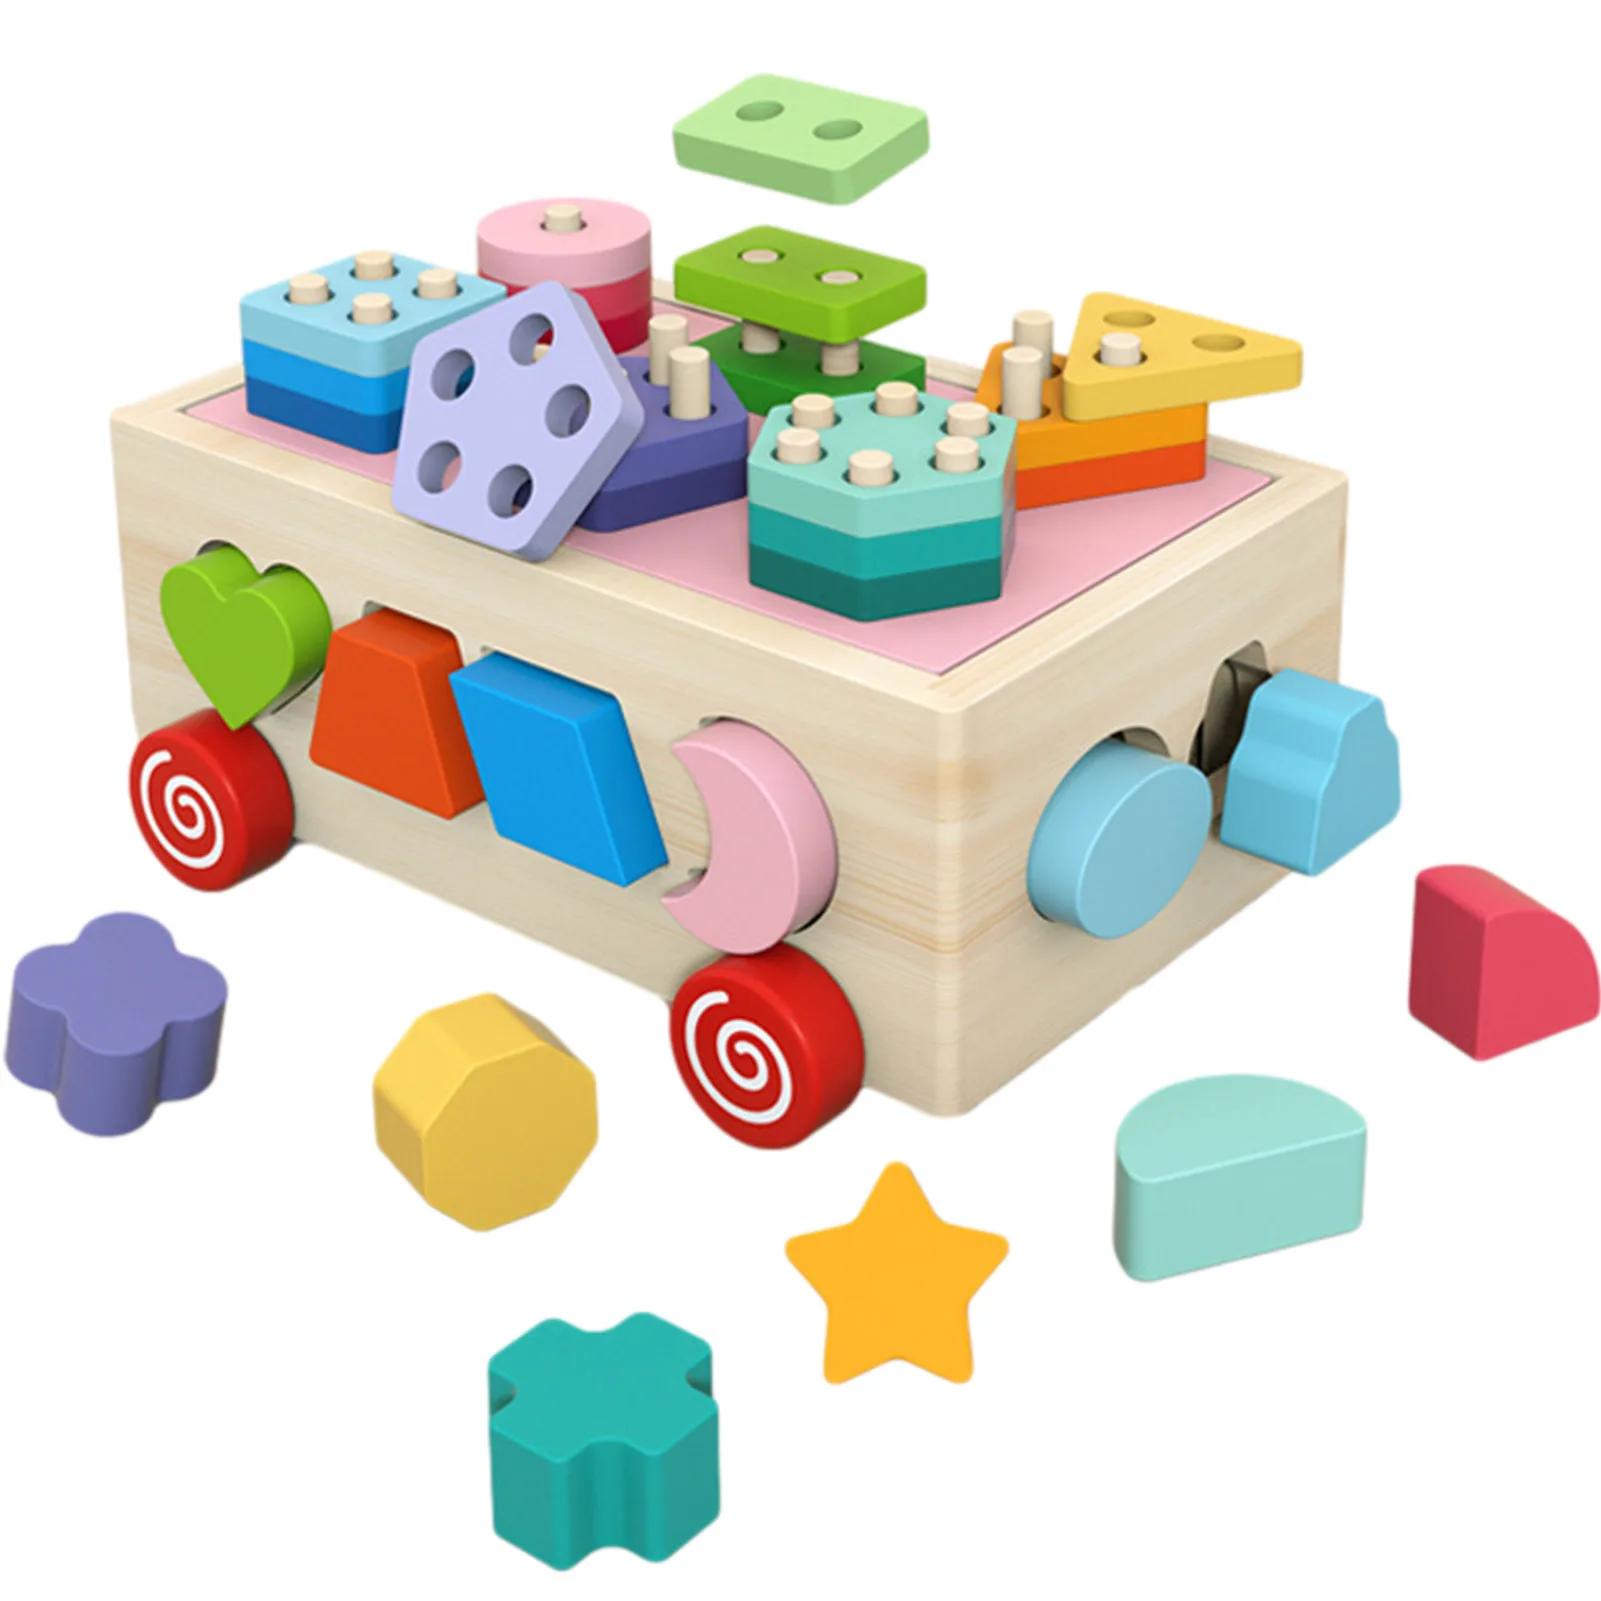 Details about   Kid Toy Wooden Building Block Puzzle Montessori Preschool Learning Gift Fun Game 